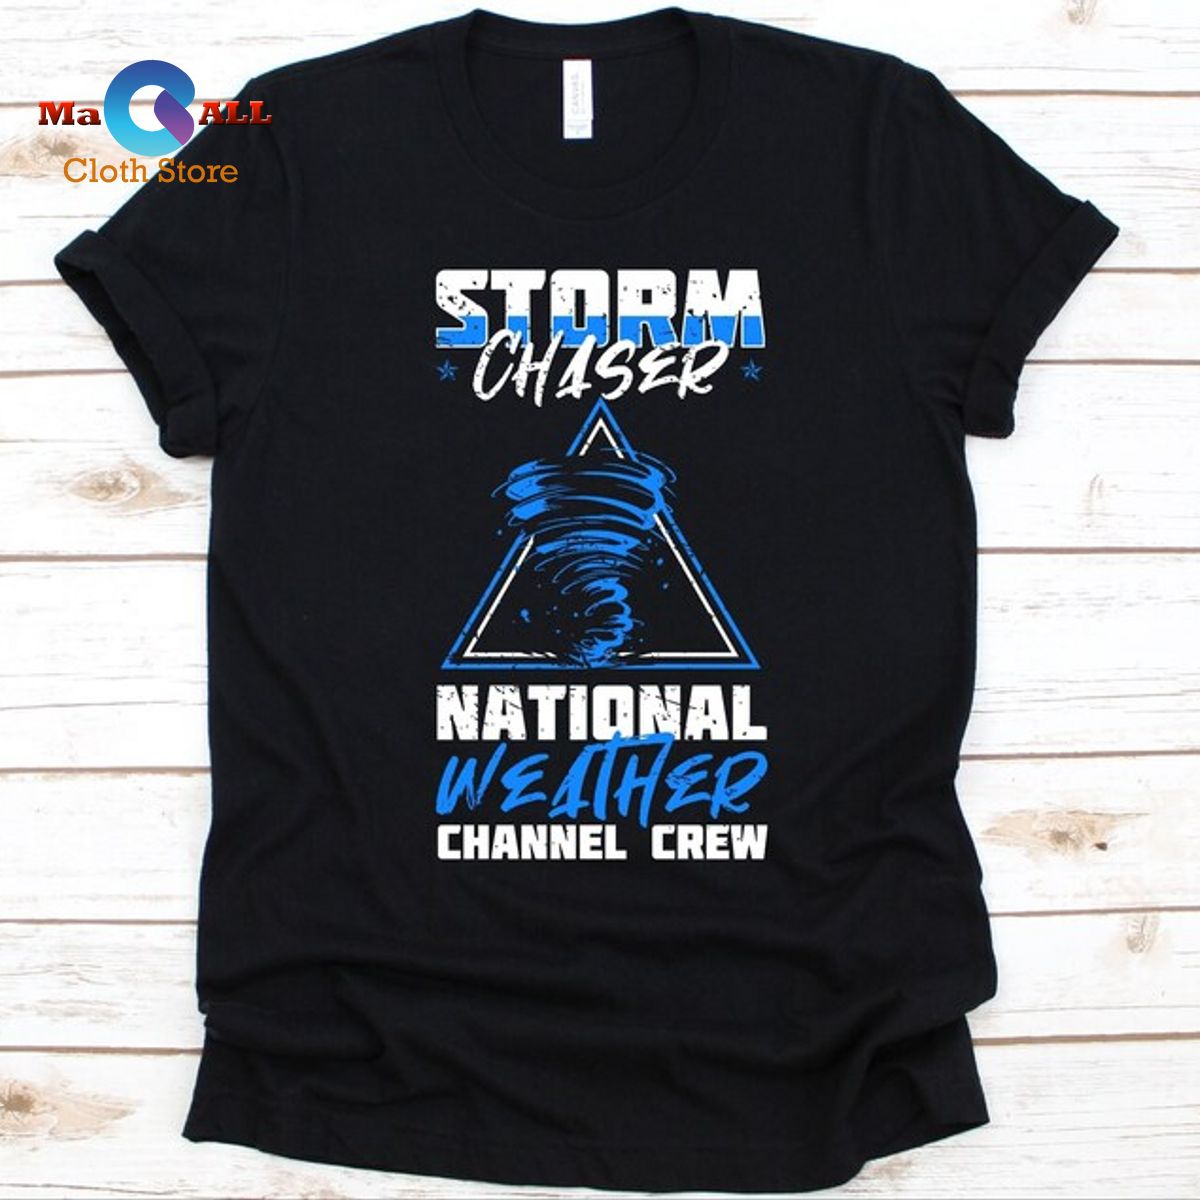 NEW] Storm Chaser National Weather Channel Crew T-Shirt - Macall Cloth  Store - Destination for fashionistas